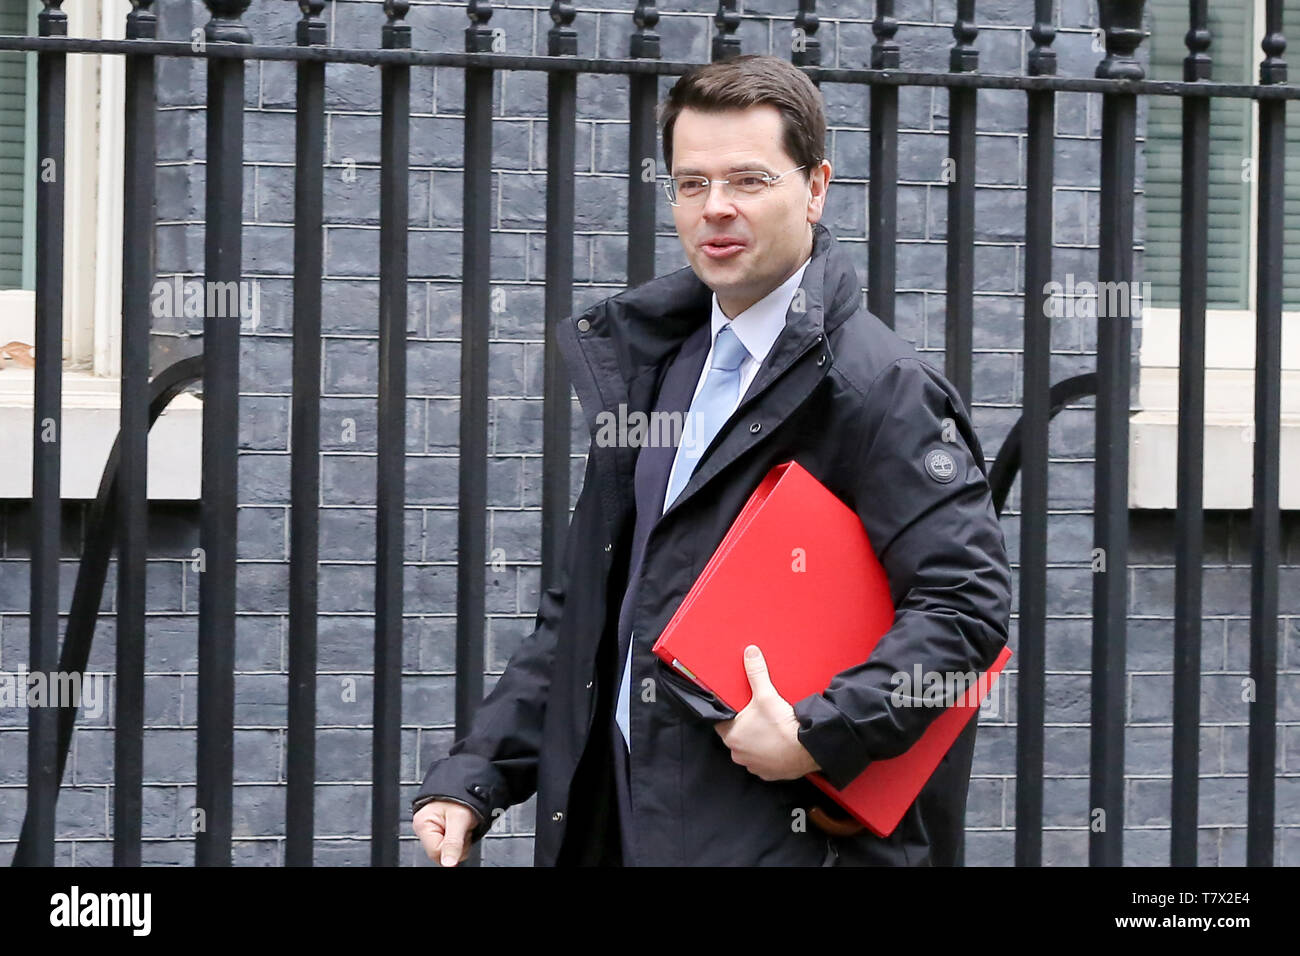 Communities Secretary James Brokenshire seen in Downing Street. On 14 June 2017, a fire broke out in the 24-storey Grenfell Tower block of flats in North Kensington, West London where 72 people died, more than 70 others were injured and 223 people escaped. The UK Government is to fund an estimated £200 million to replacement of unsafe Grenfell style cladding on around 170 high-rise private residential buildings after private building owners failed to take action. Communities Secretary James Brokenshire said inaction from building owners had compelled the government to act. Stock Photo